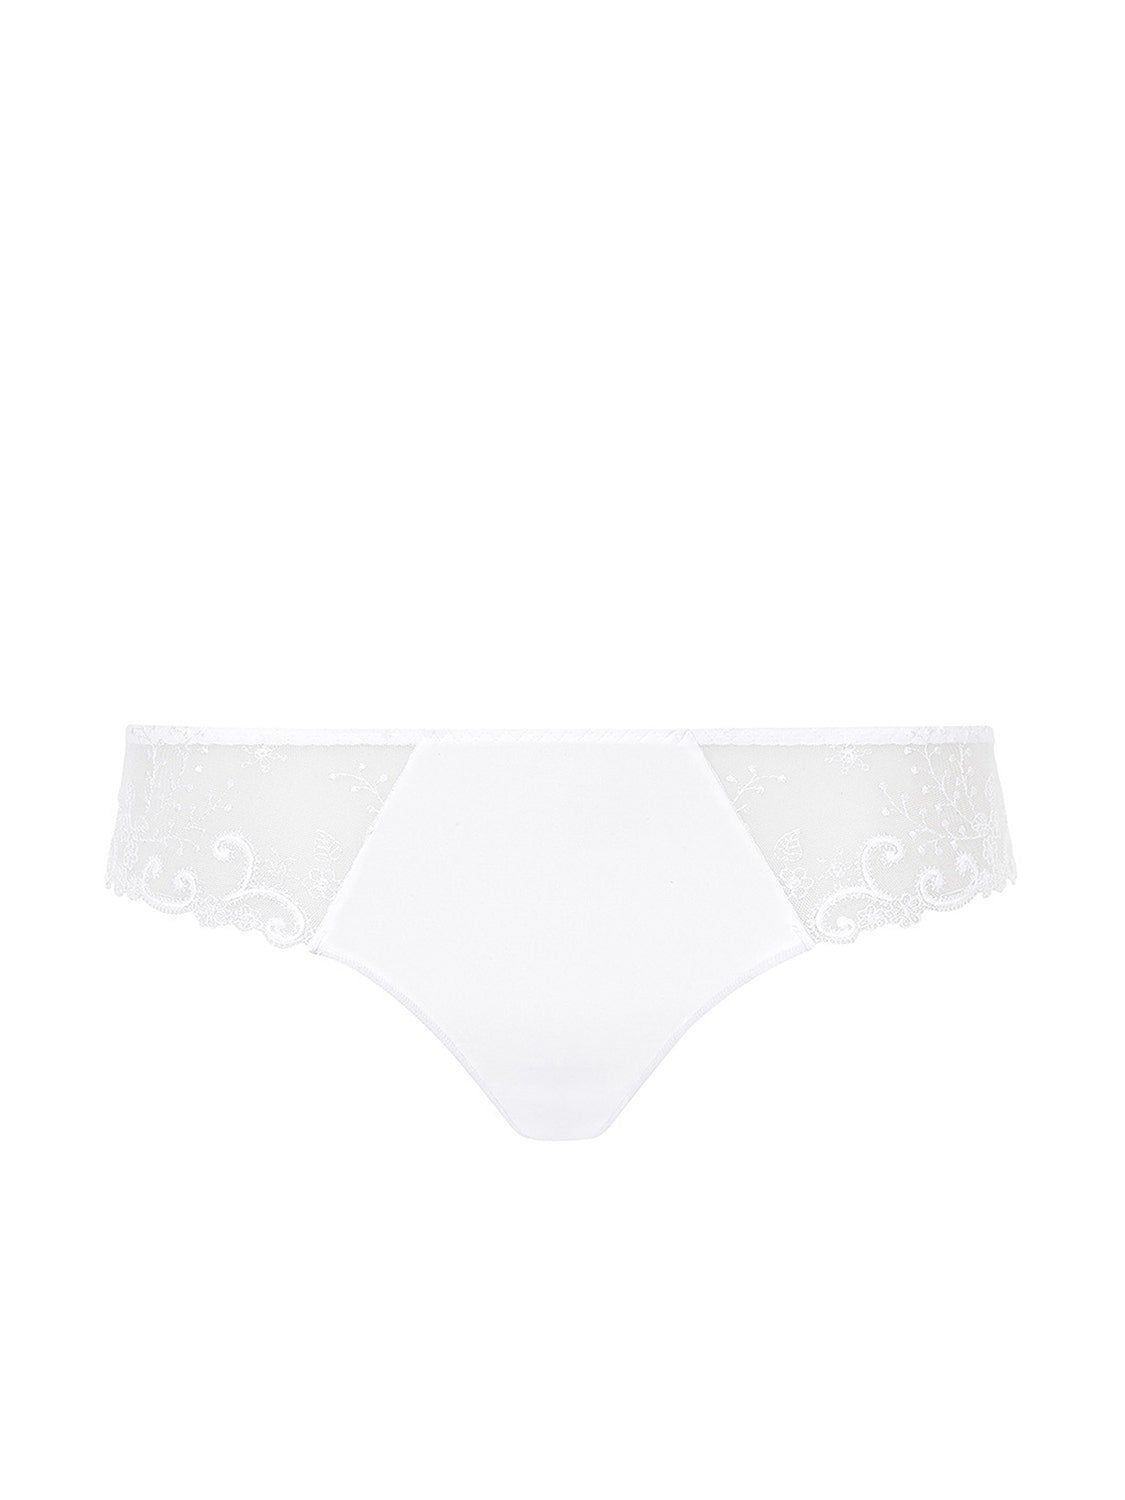 thong-white-delice-40